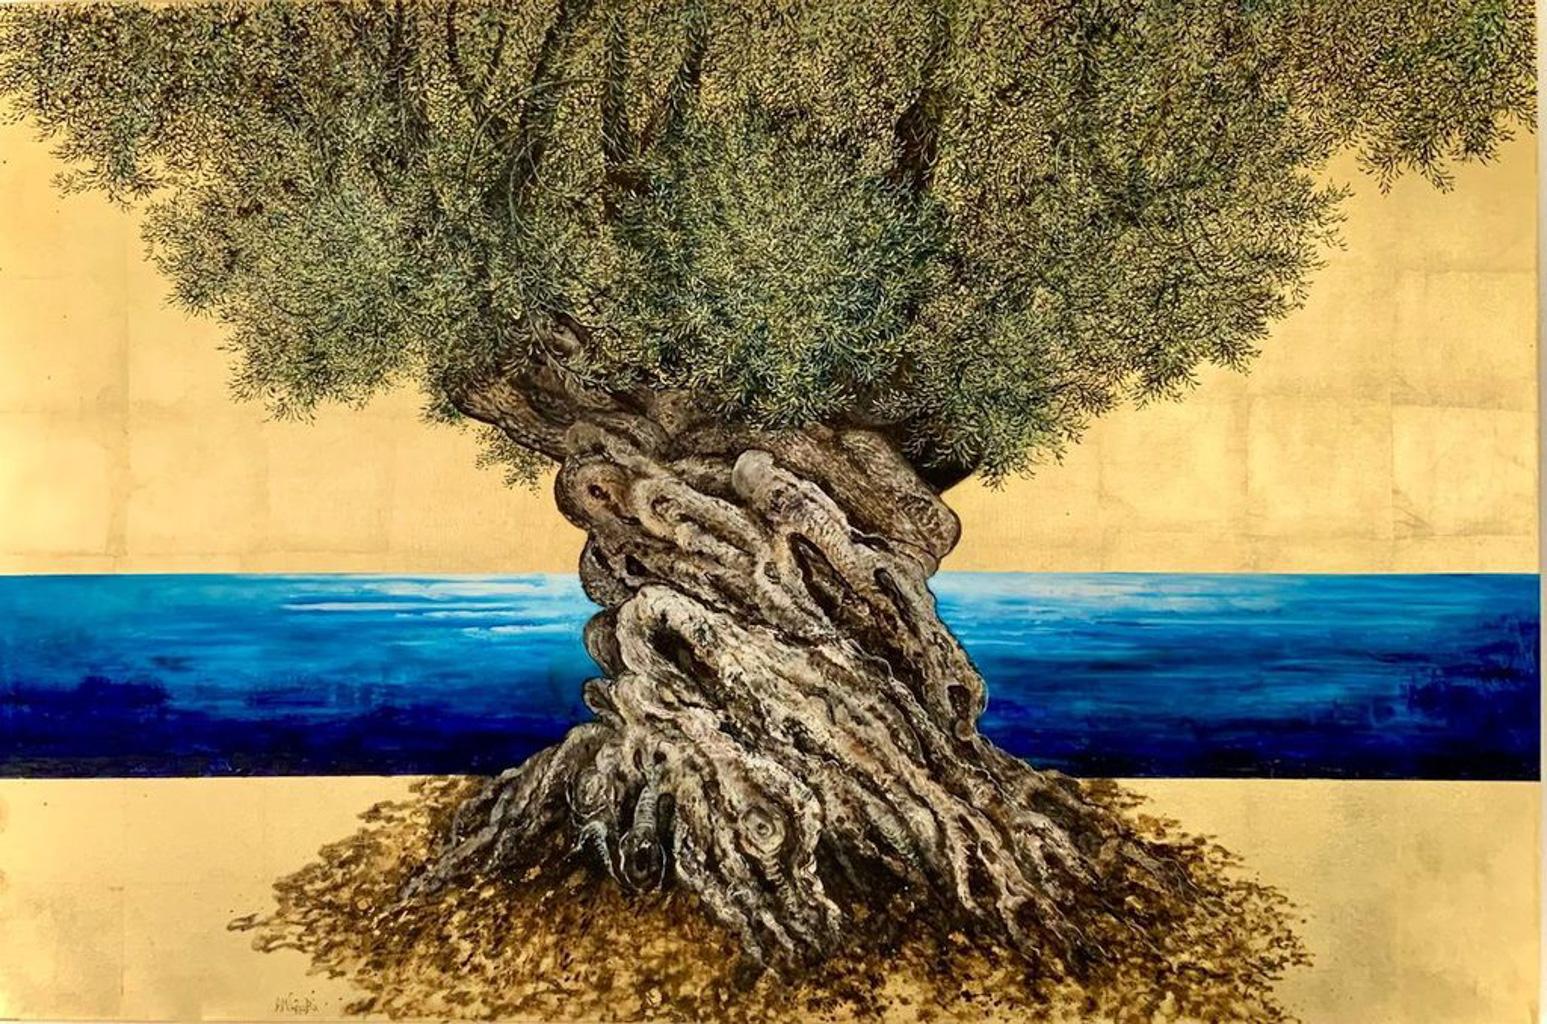 "Make Room for the Time", oil and gold leaf painting of olive tree and blue sea